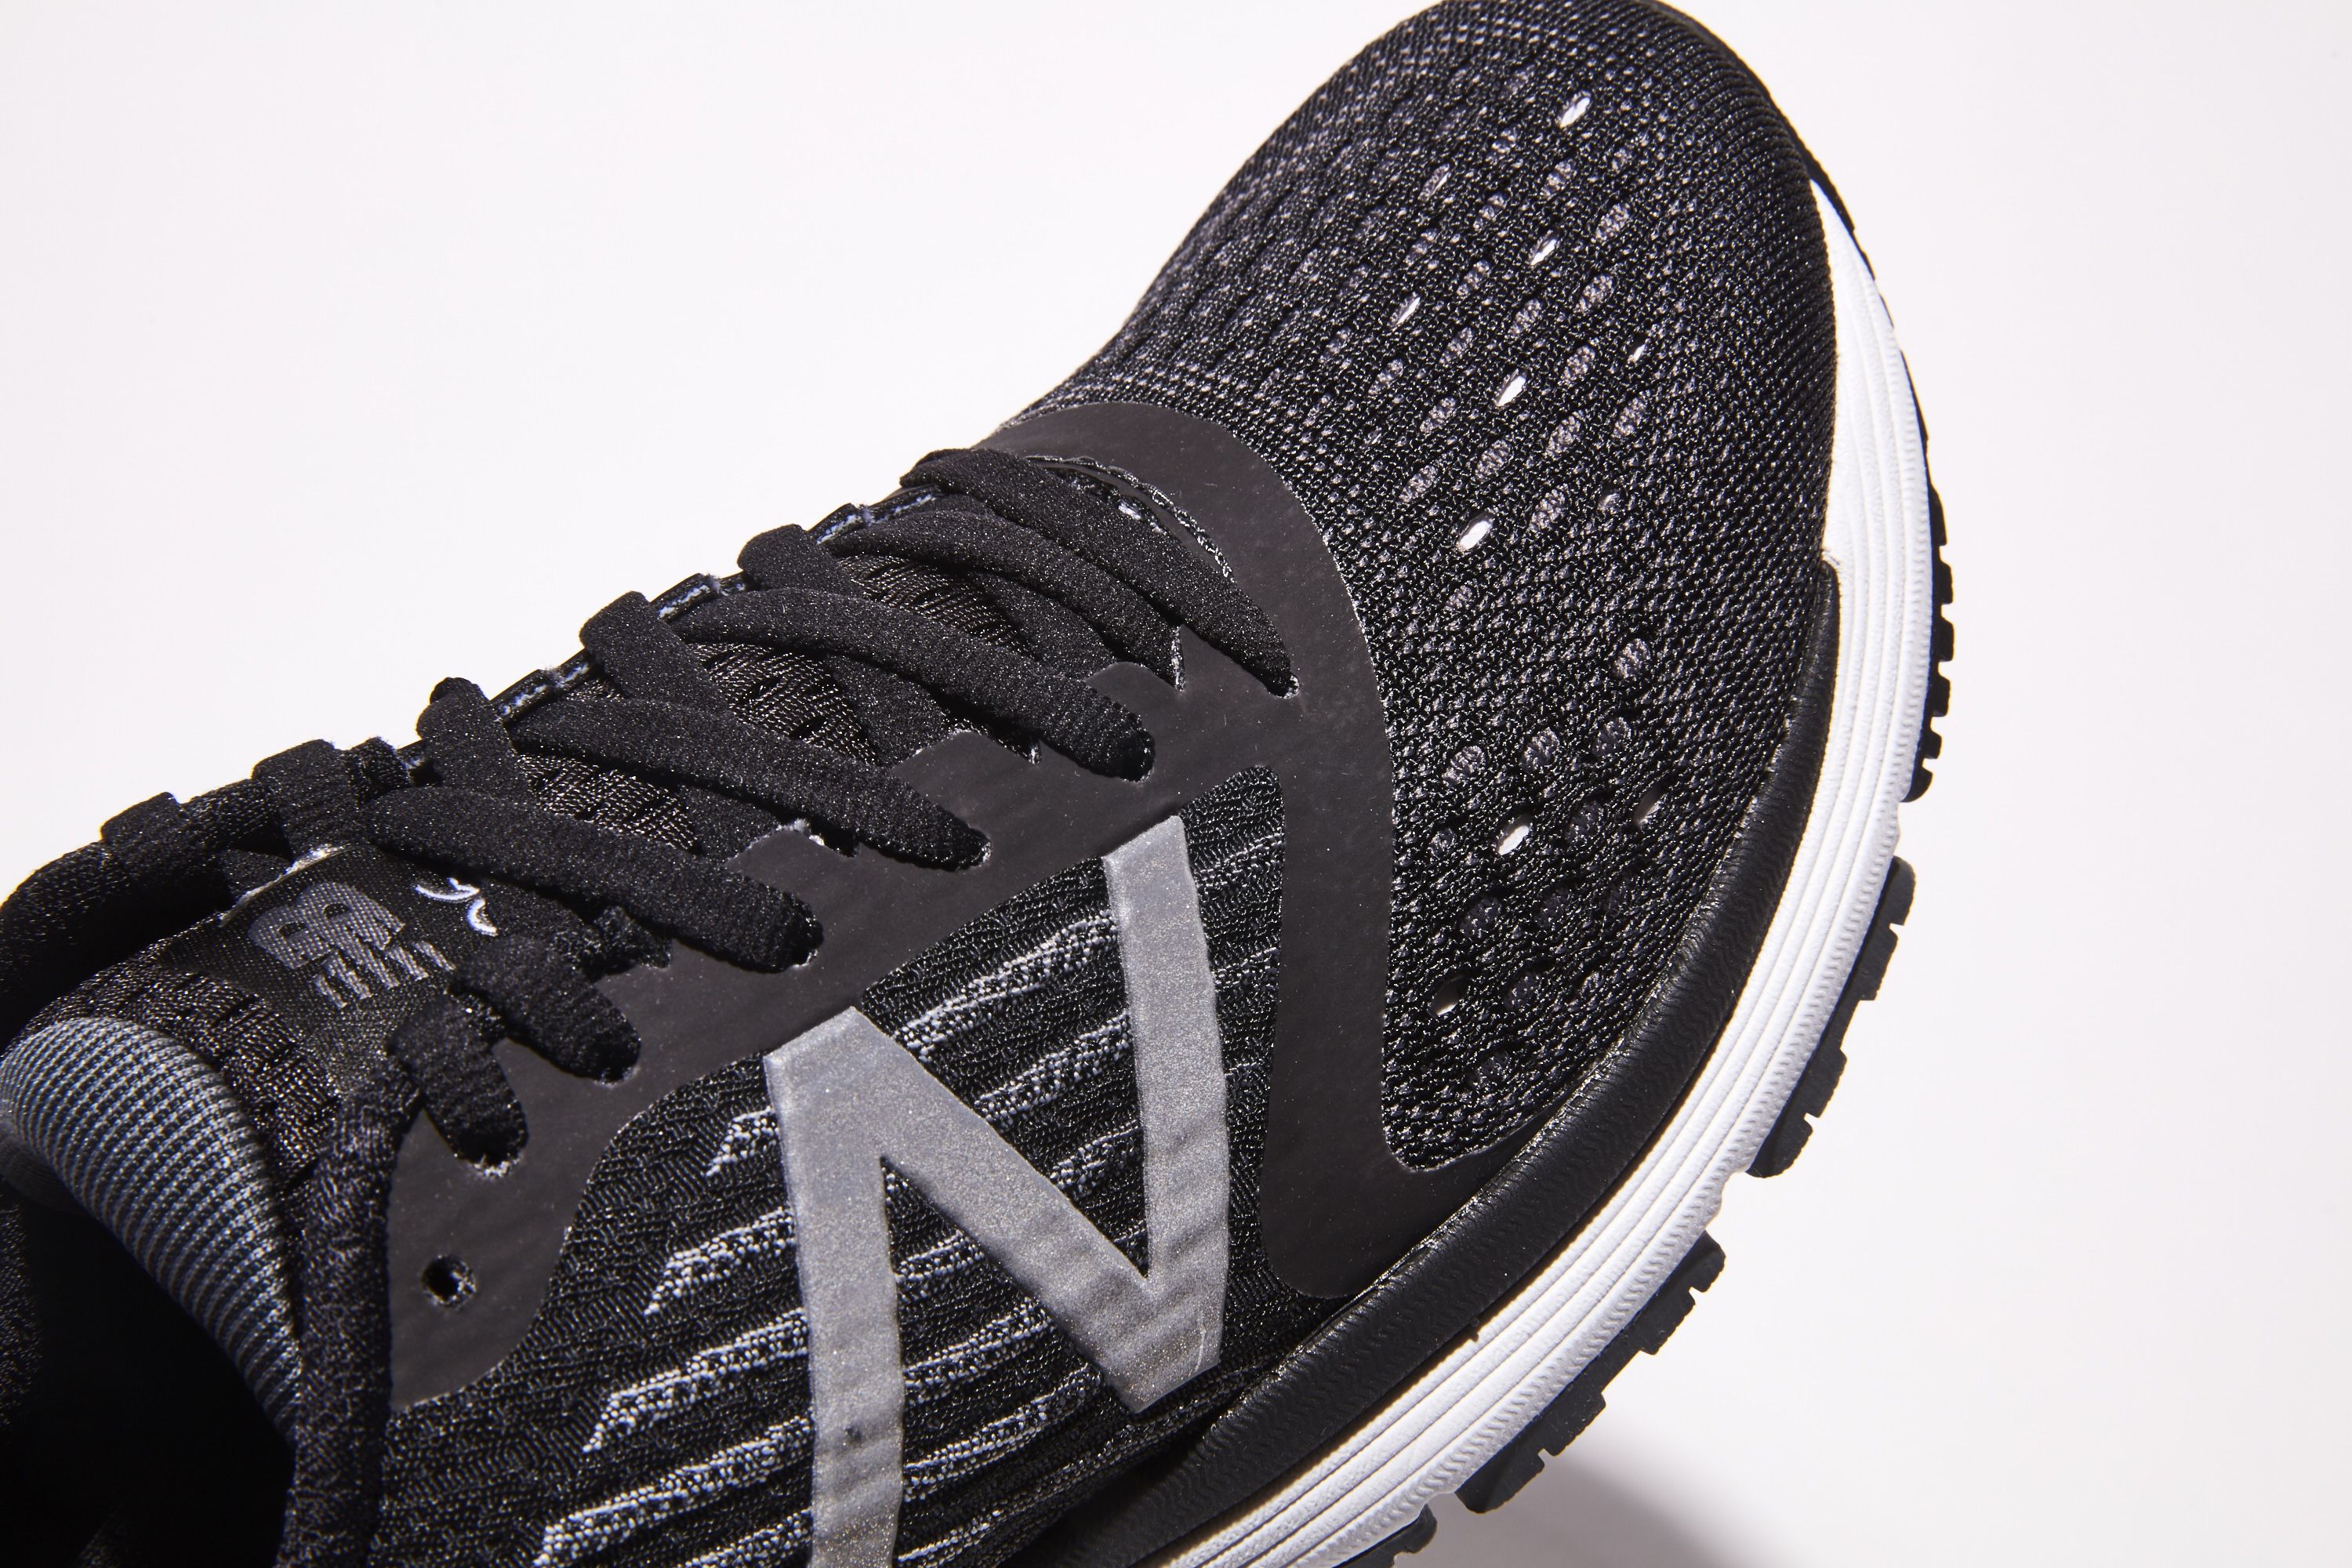 New Balance - Moderate Shoe Review